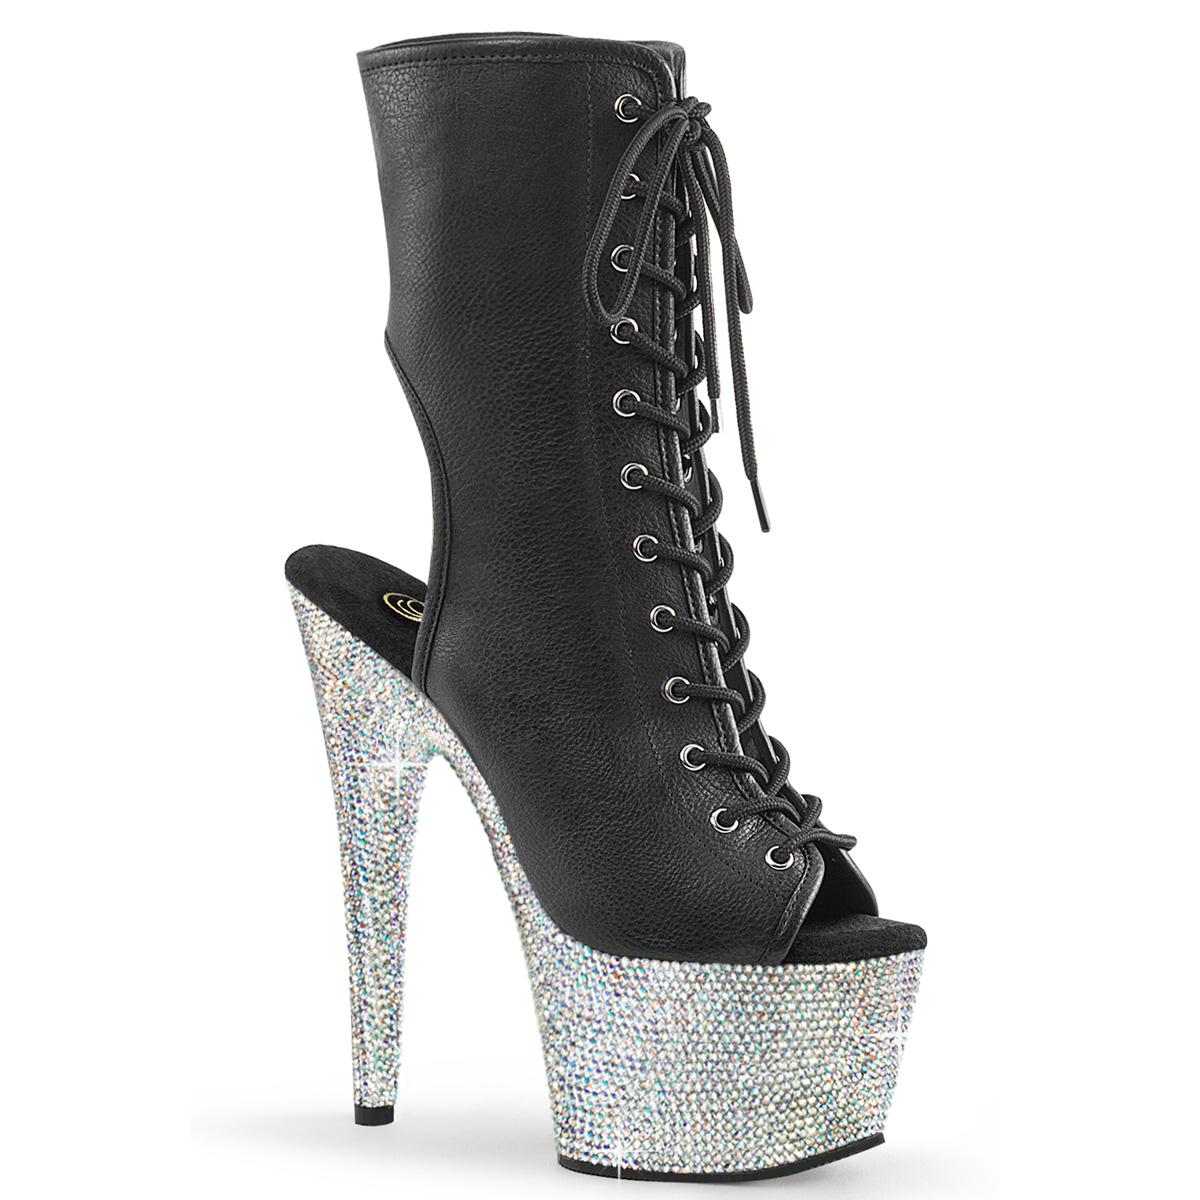 Bejeweled Ankle Boot with Rhinestones